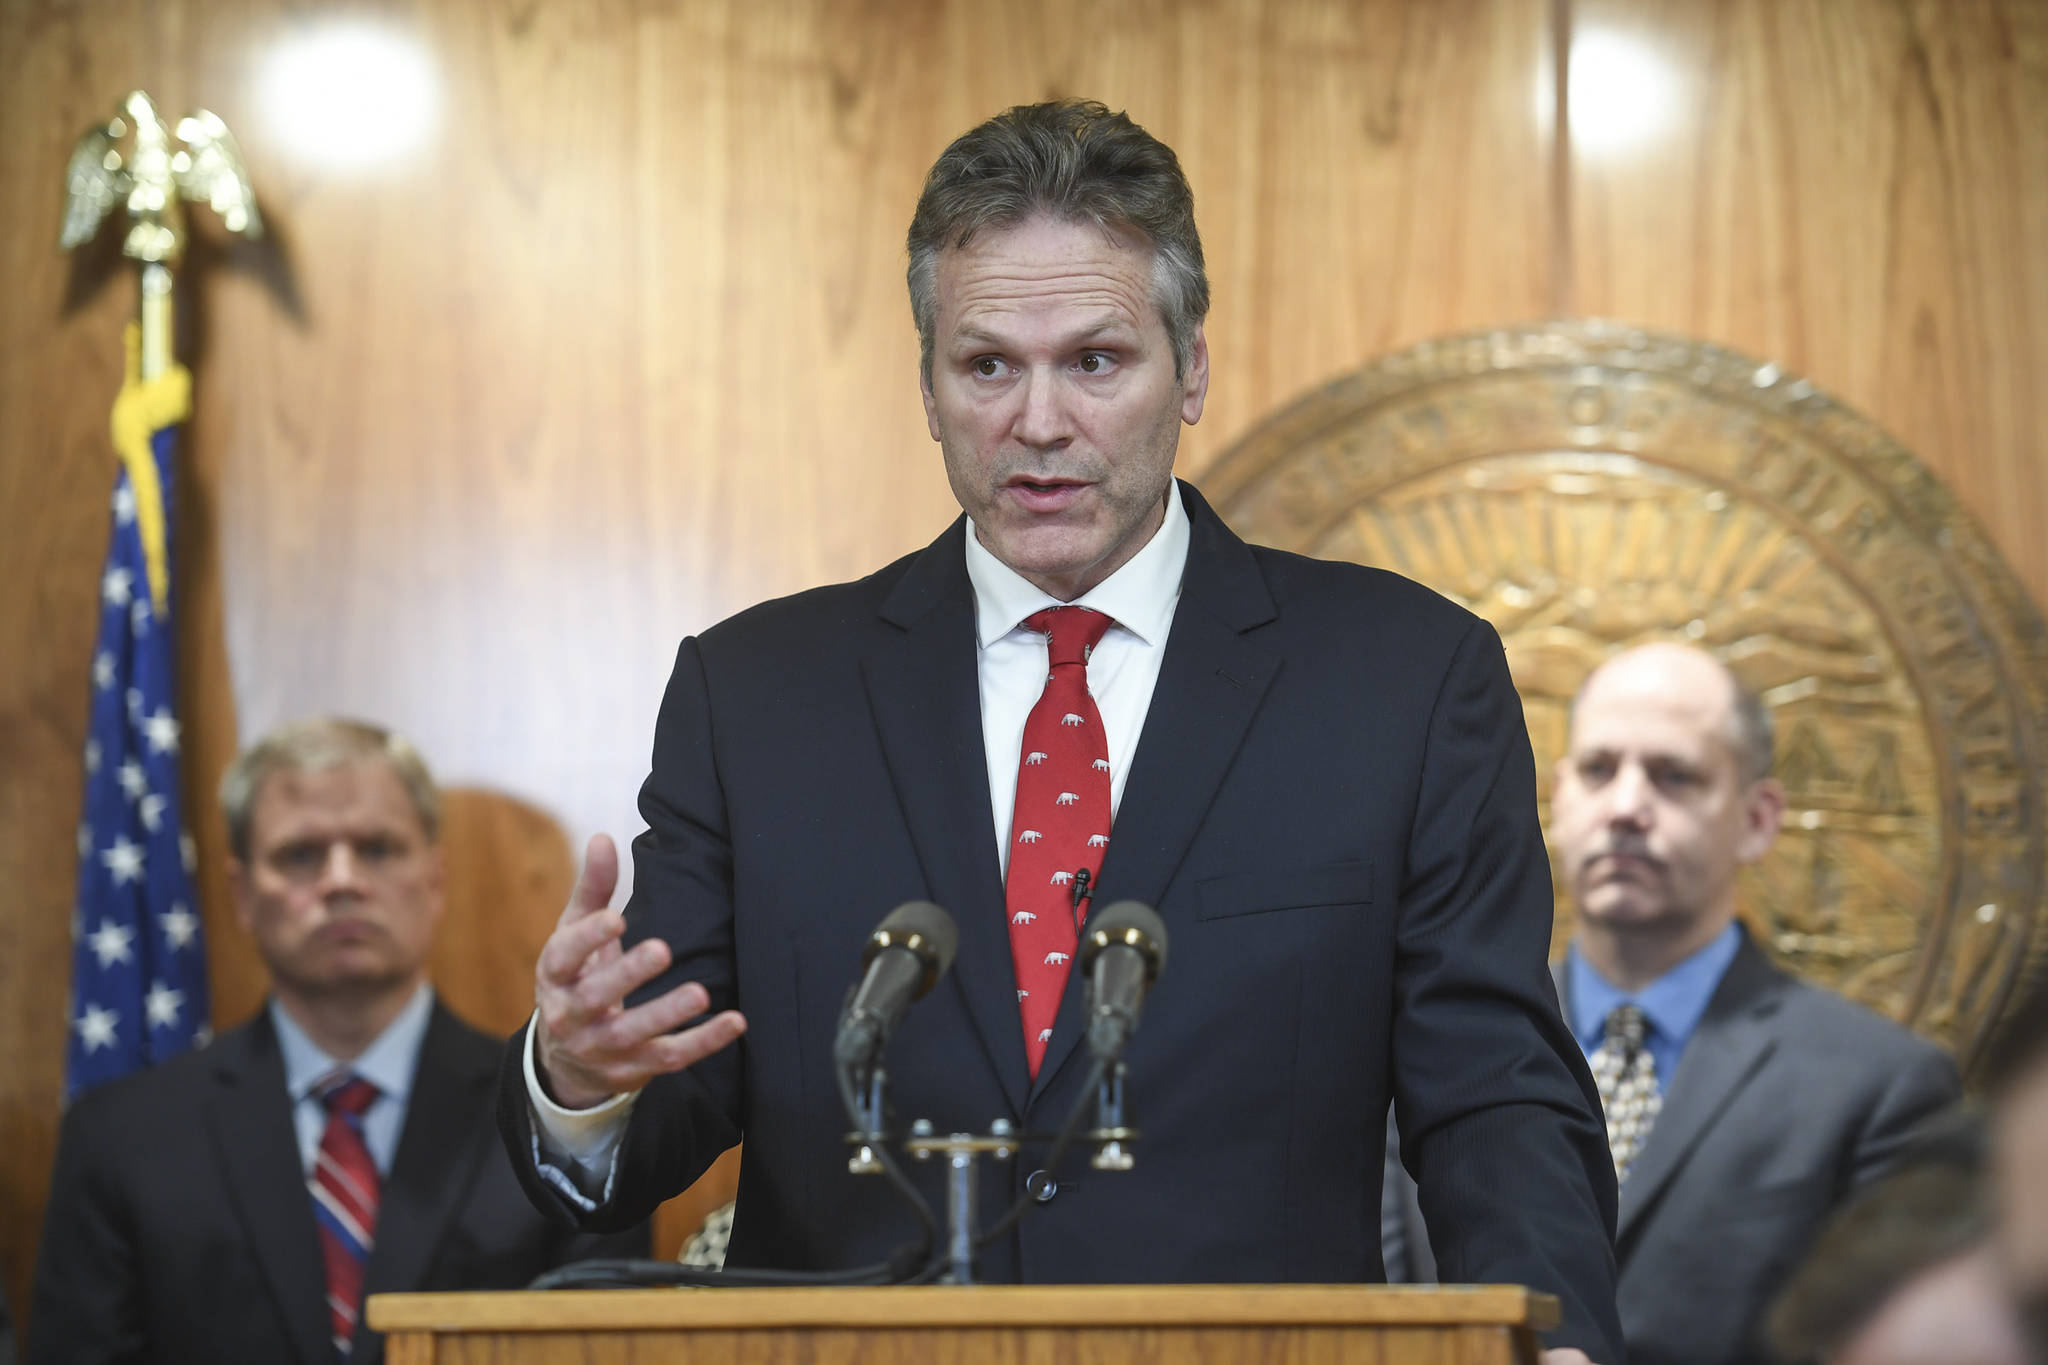 Alaska Gov. Mike Dunleavy announces his state budget during a press conference at the Capitol in Juneau, Alaska, on Wednesday, Dec. 11, 2019. (Michael Penn/Juneau Empire via AP)